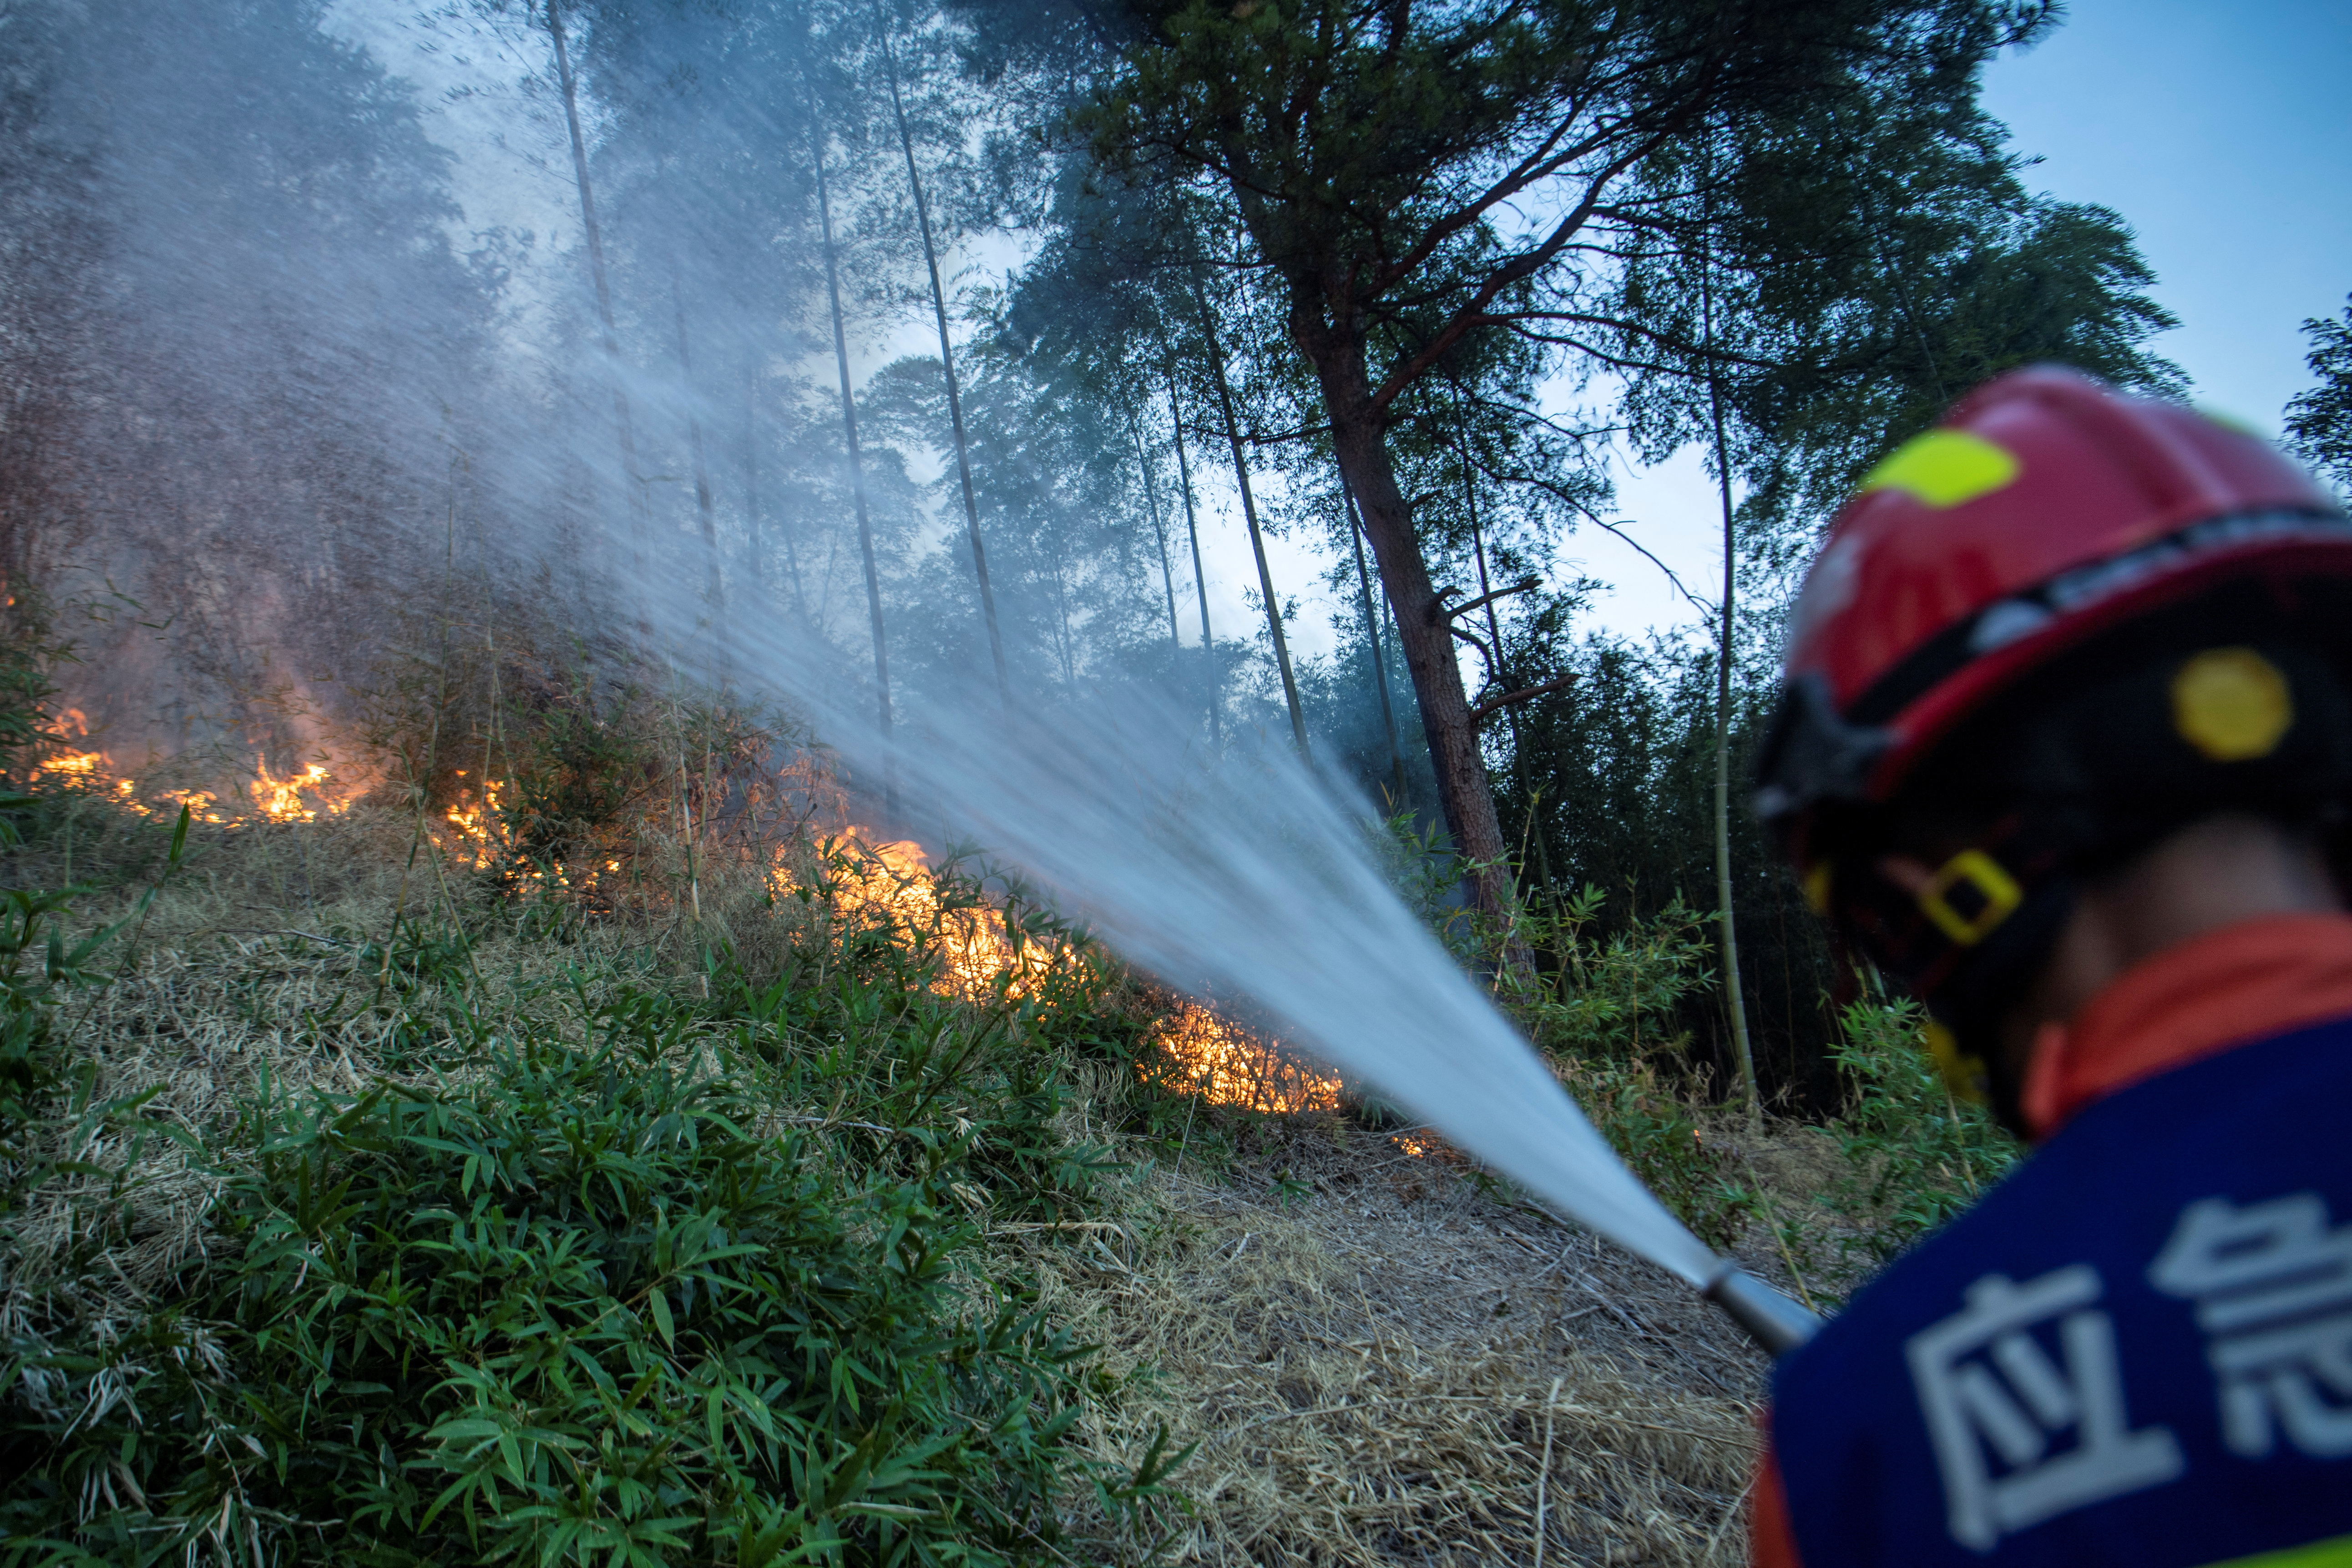 Firefighter puts out wildfire that broke out in a forest amid hot temperatures, in Luzhou, Sichuan